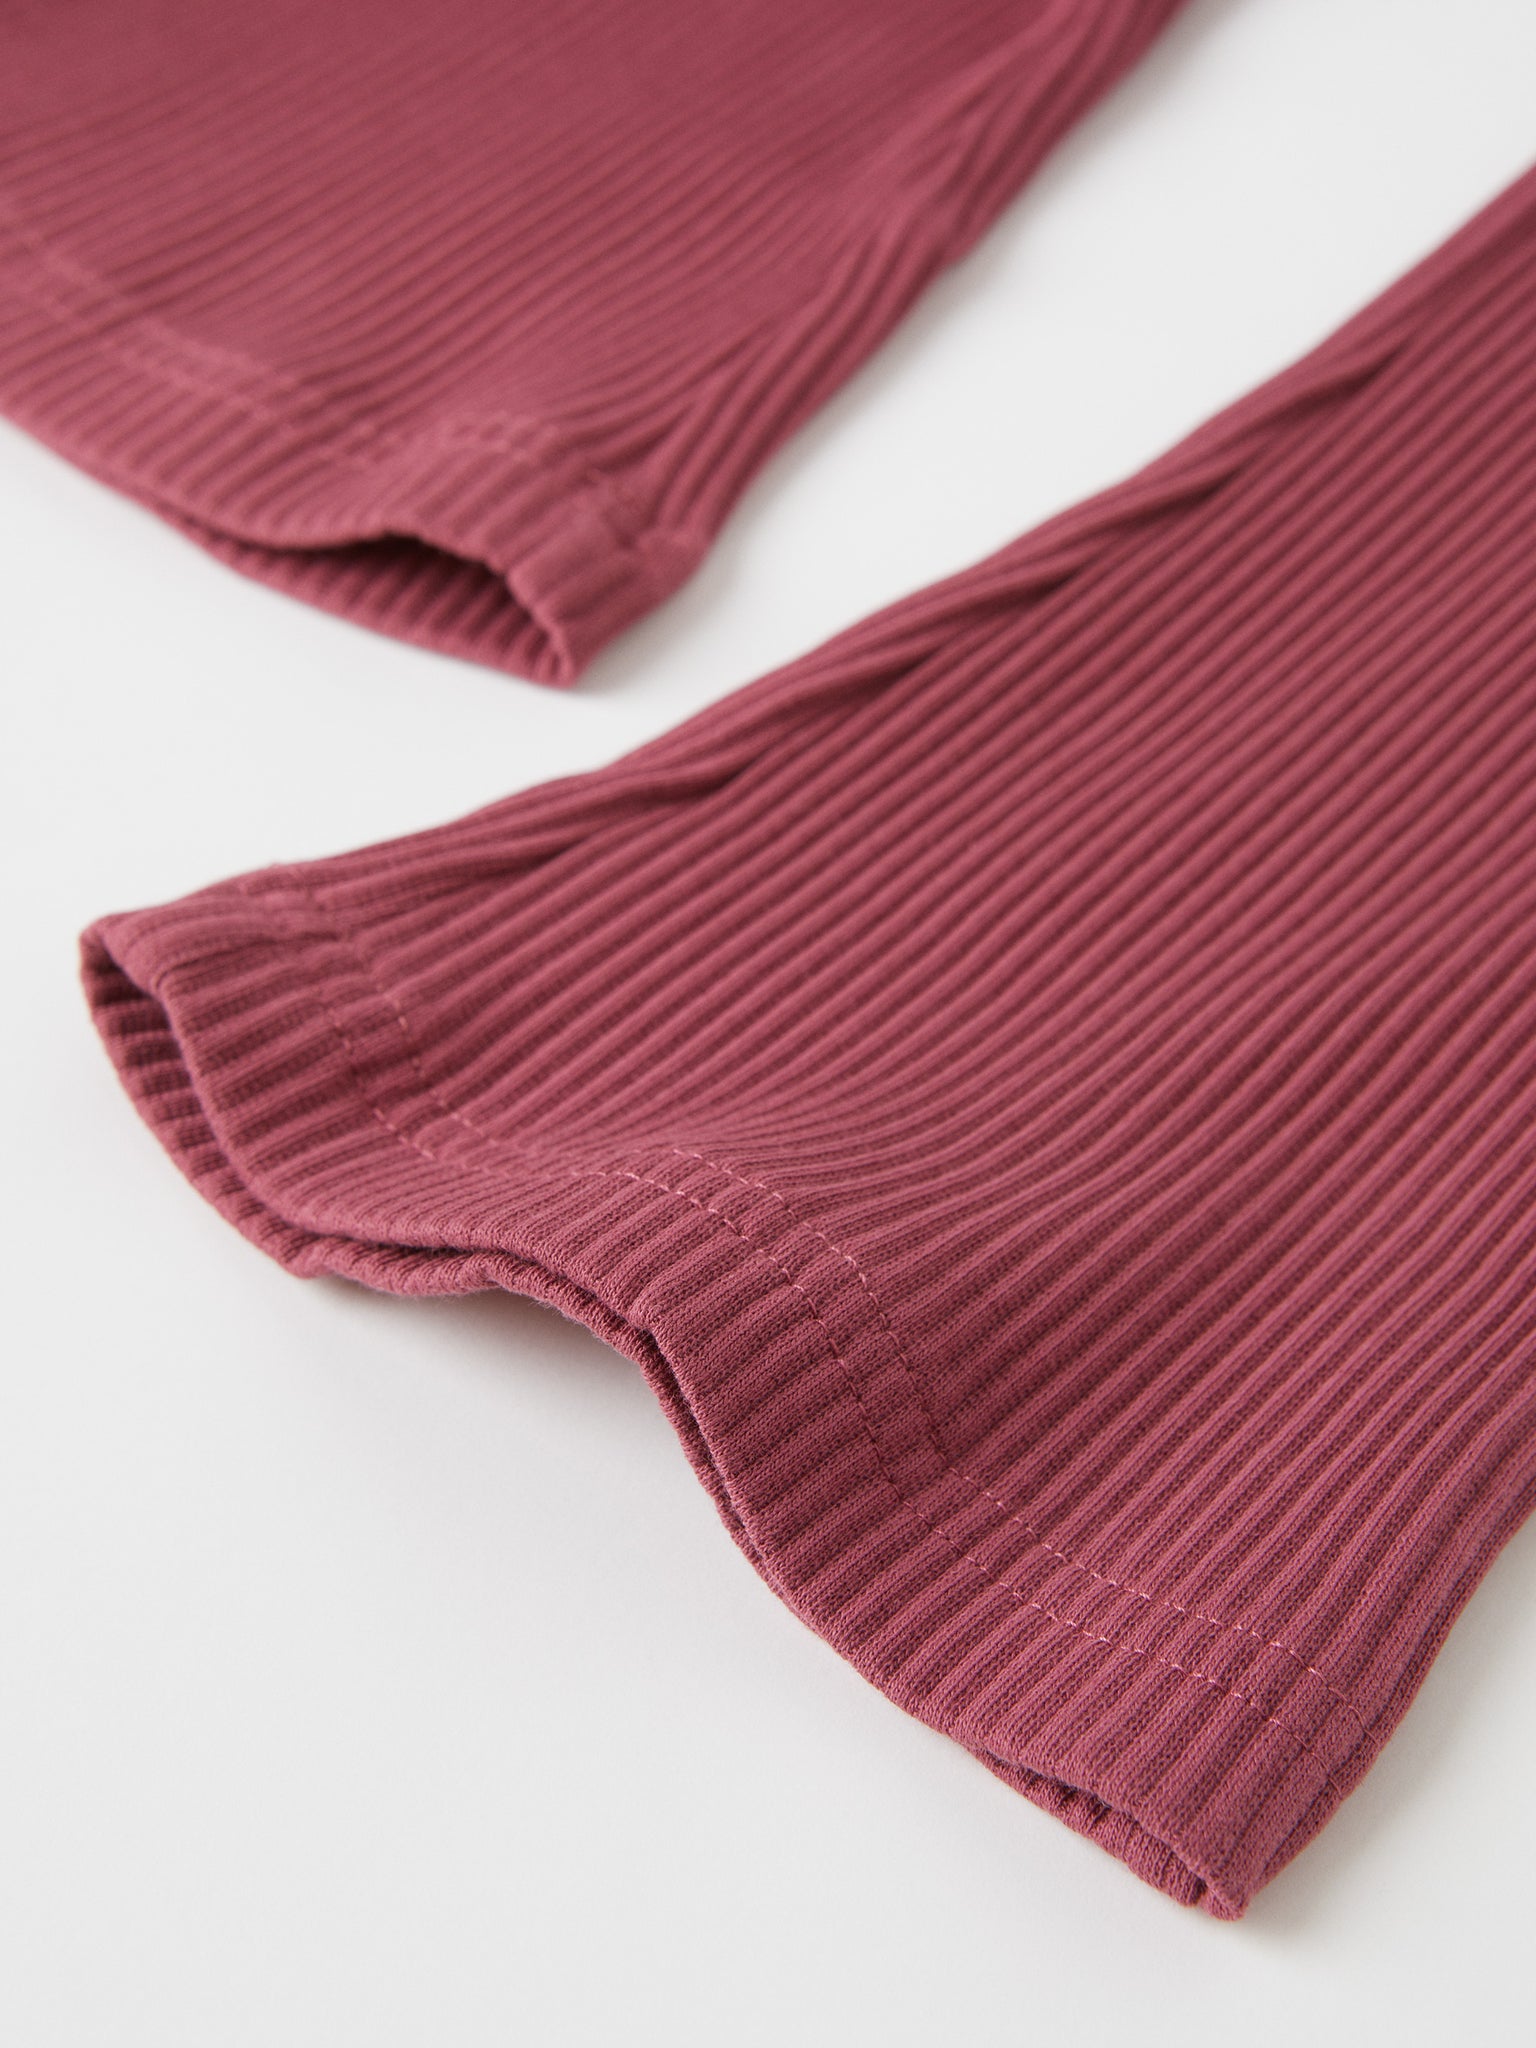 Organic Cotton Red Ribbed Kids Leggings from the Polarn O. Pyret kidswear collection. The best ethical kids clothes